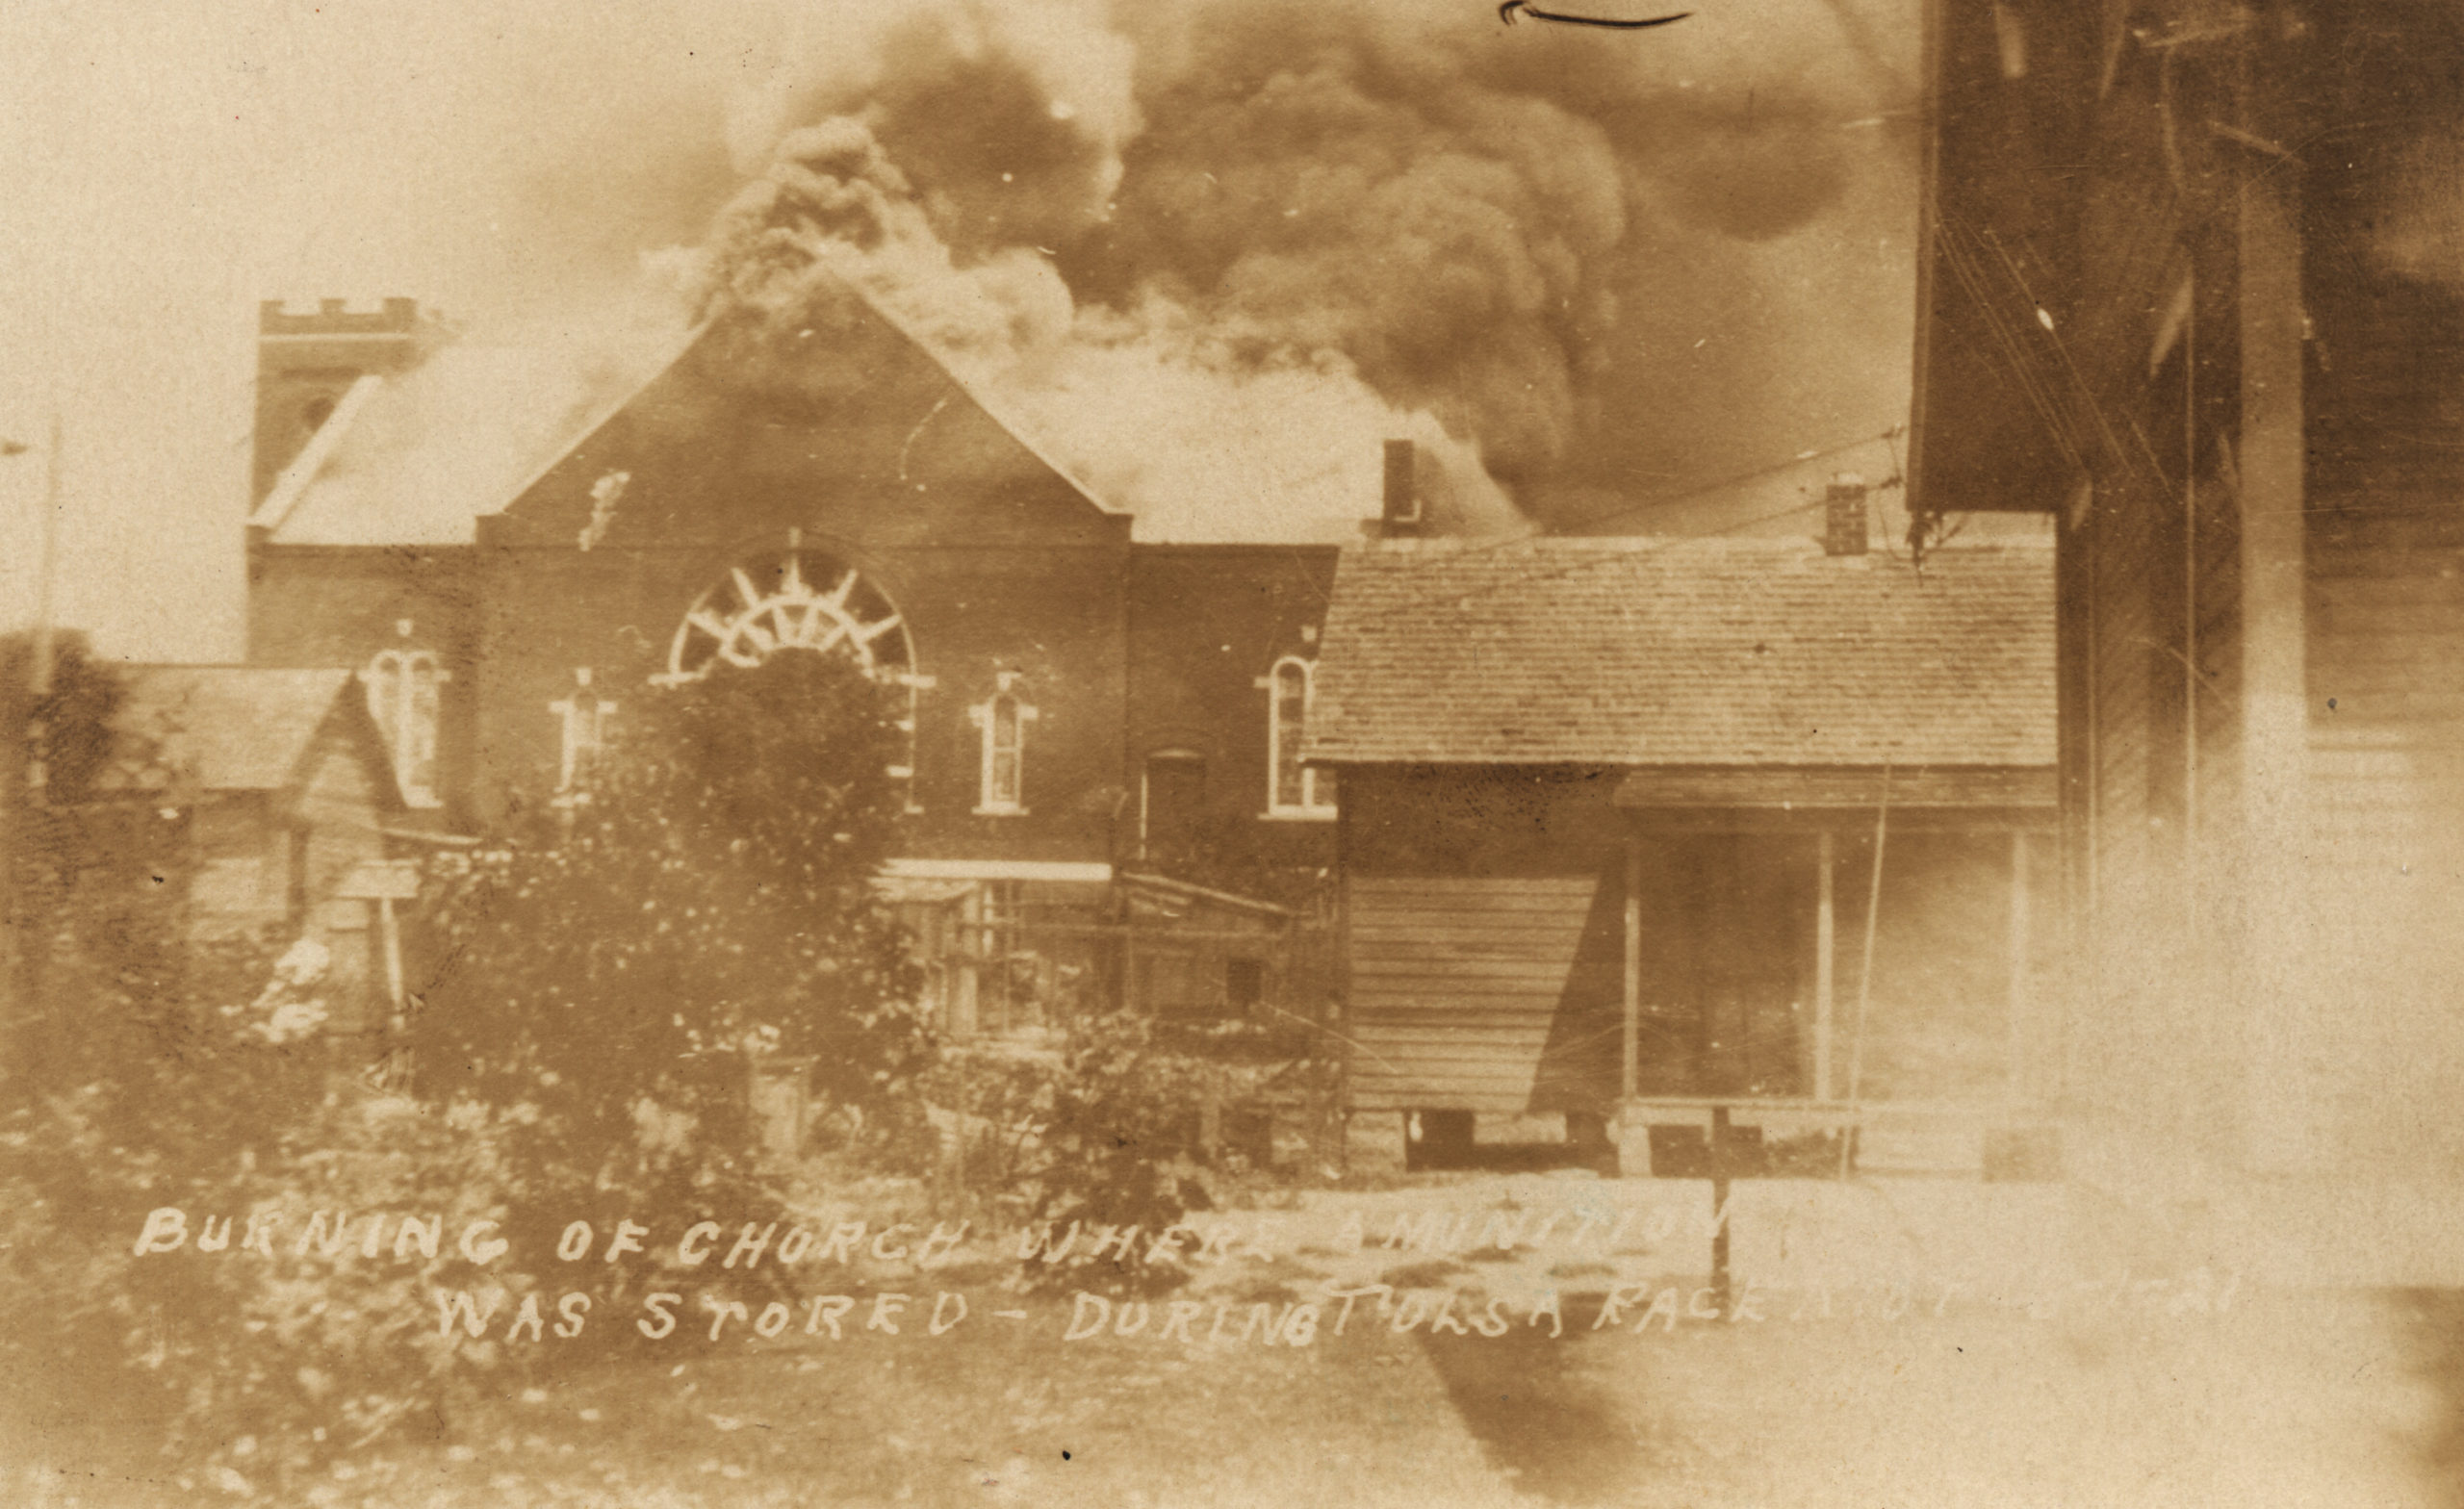 Mt. Zion Baptist Church is burning in this picture taken about Cameron St. and Elgin Ave. The Church was rumored at the time to have been a storehouse for weapons and ammunition. Title is taken from the writing on the face of the postcard.